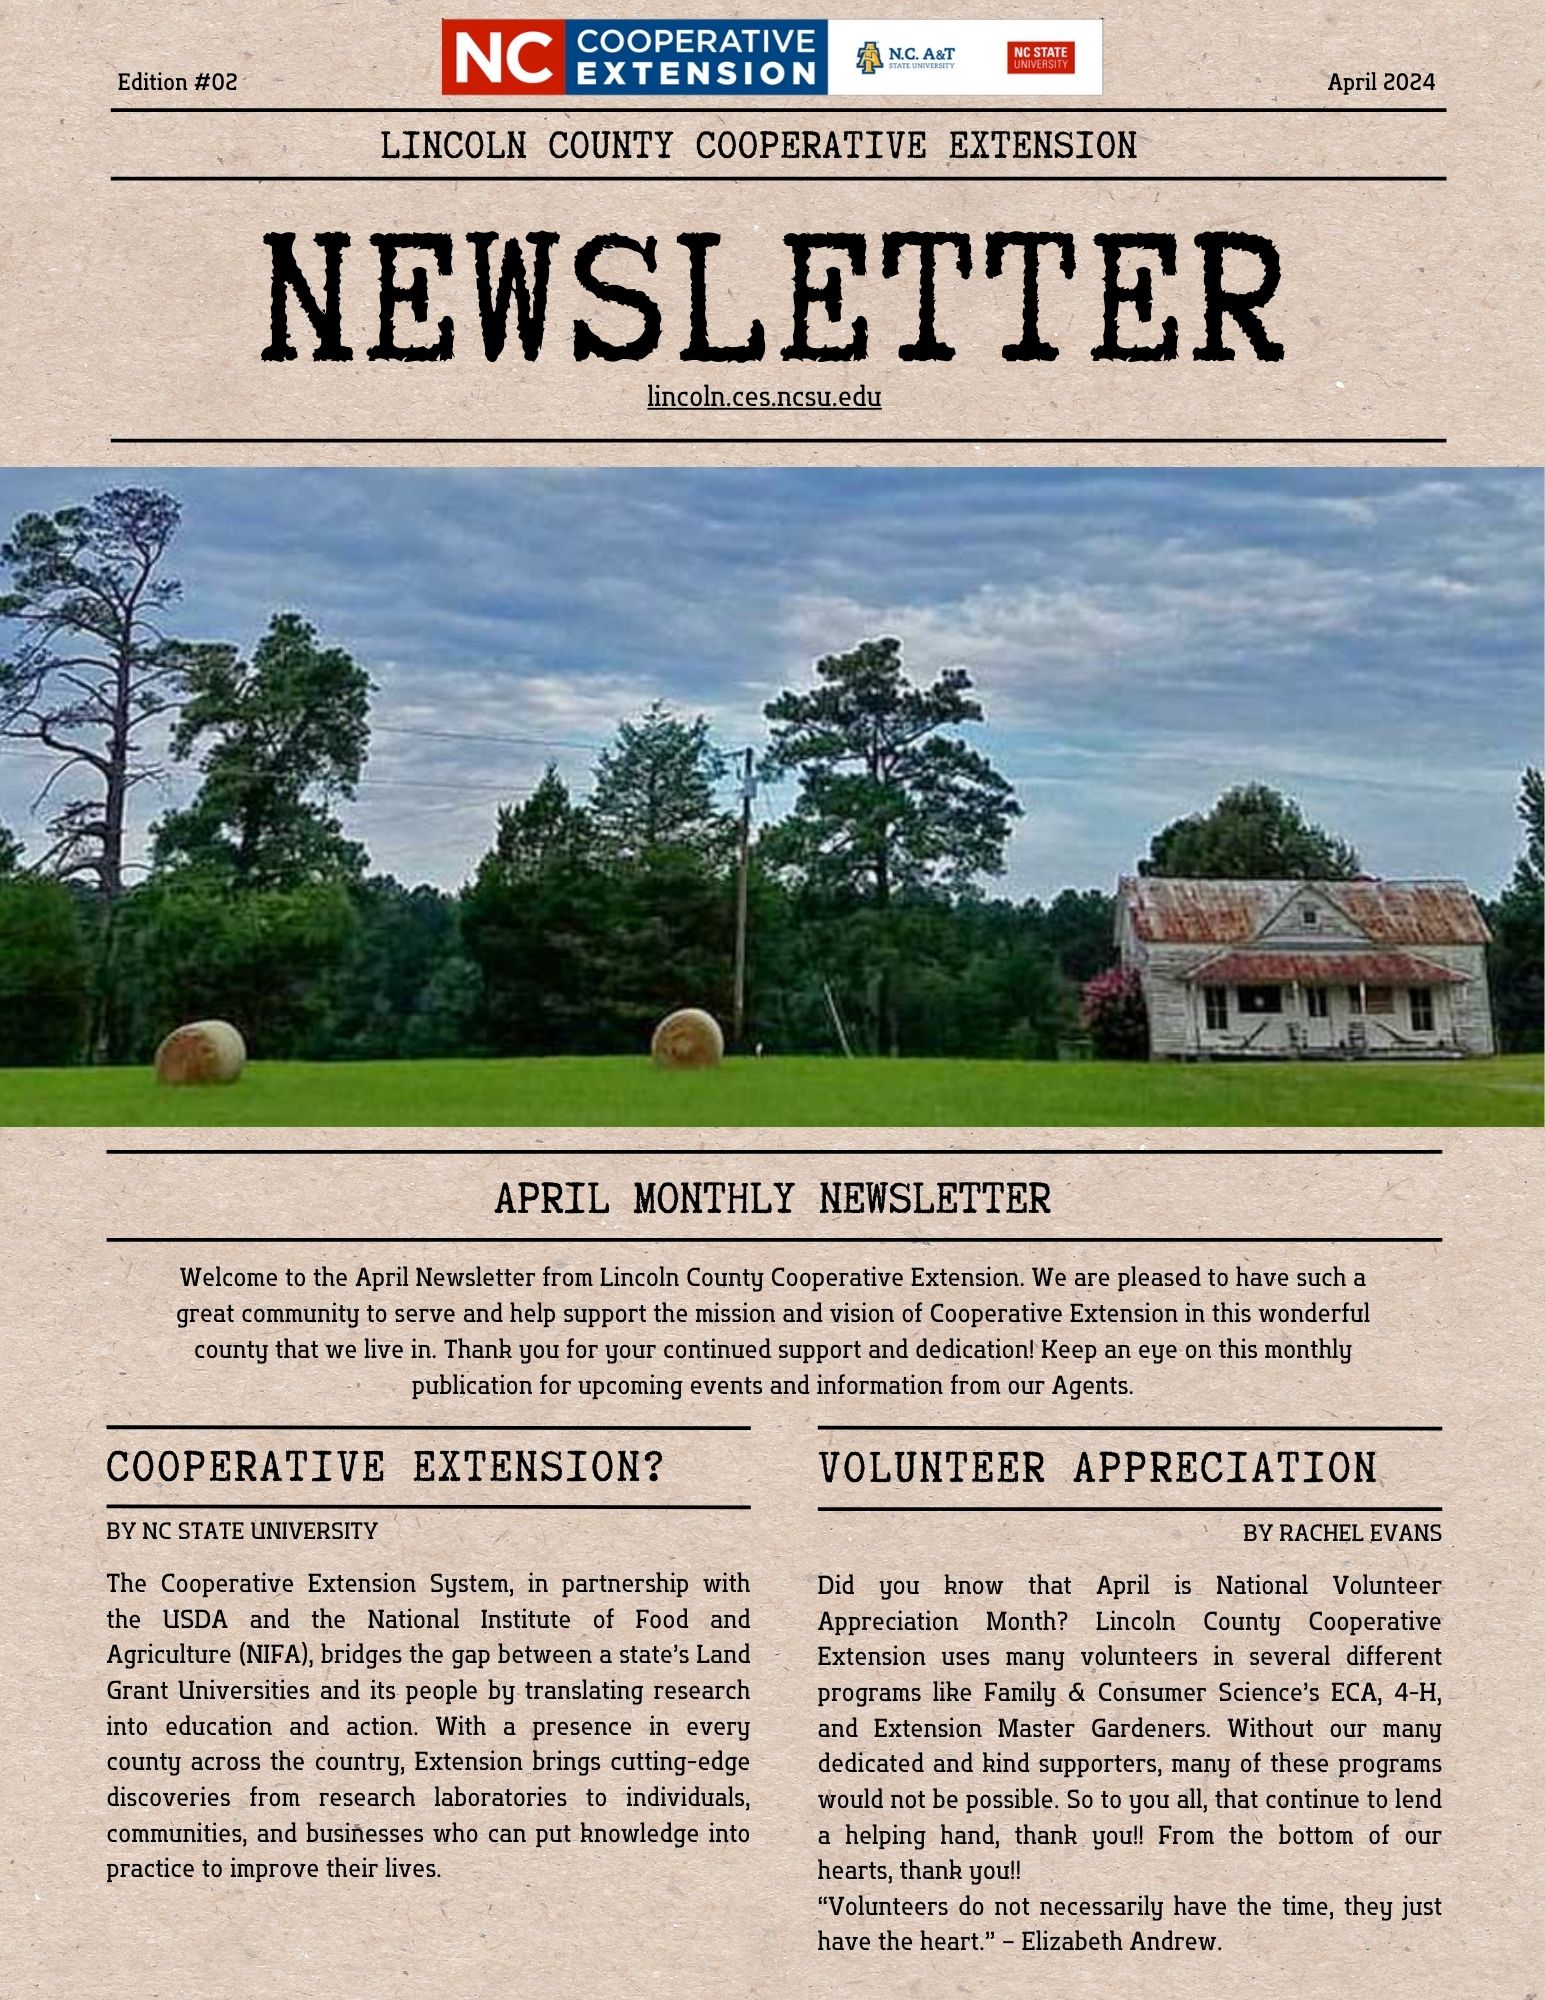 1st page of April Newsletter